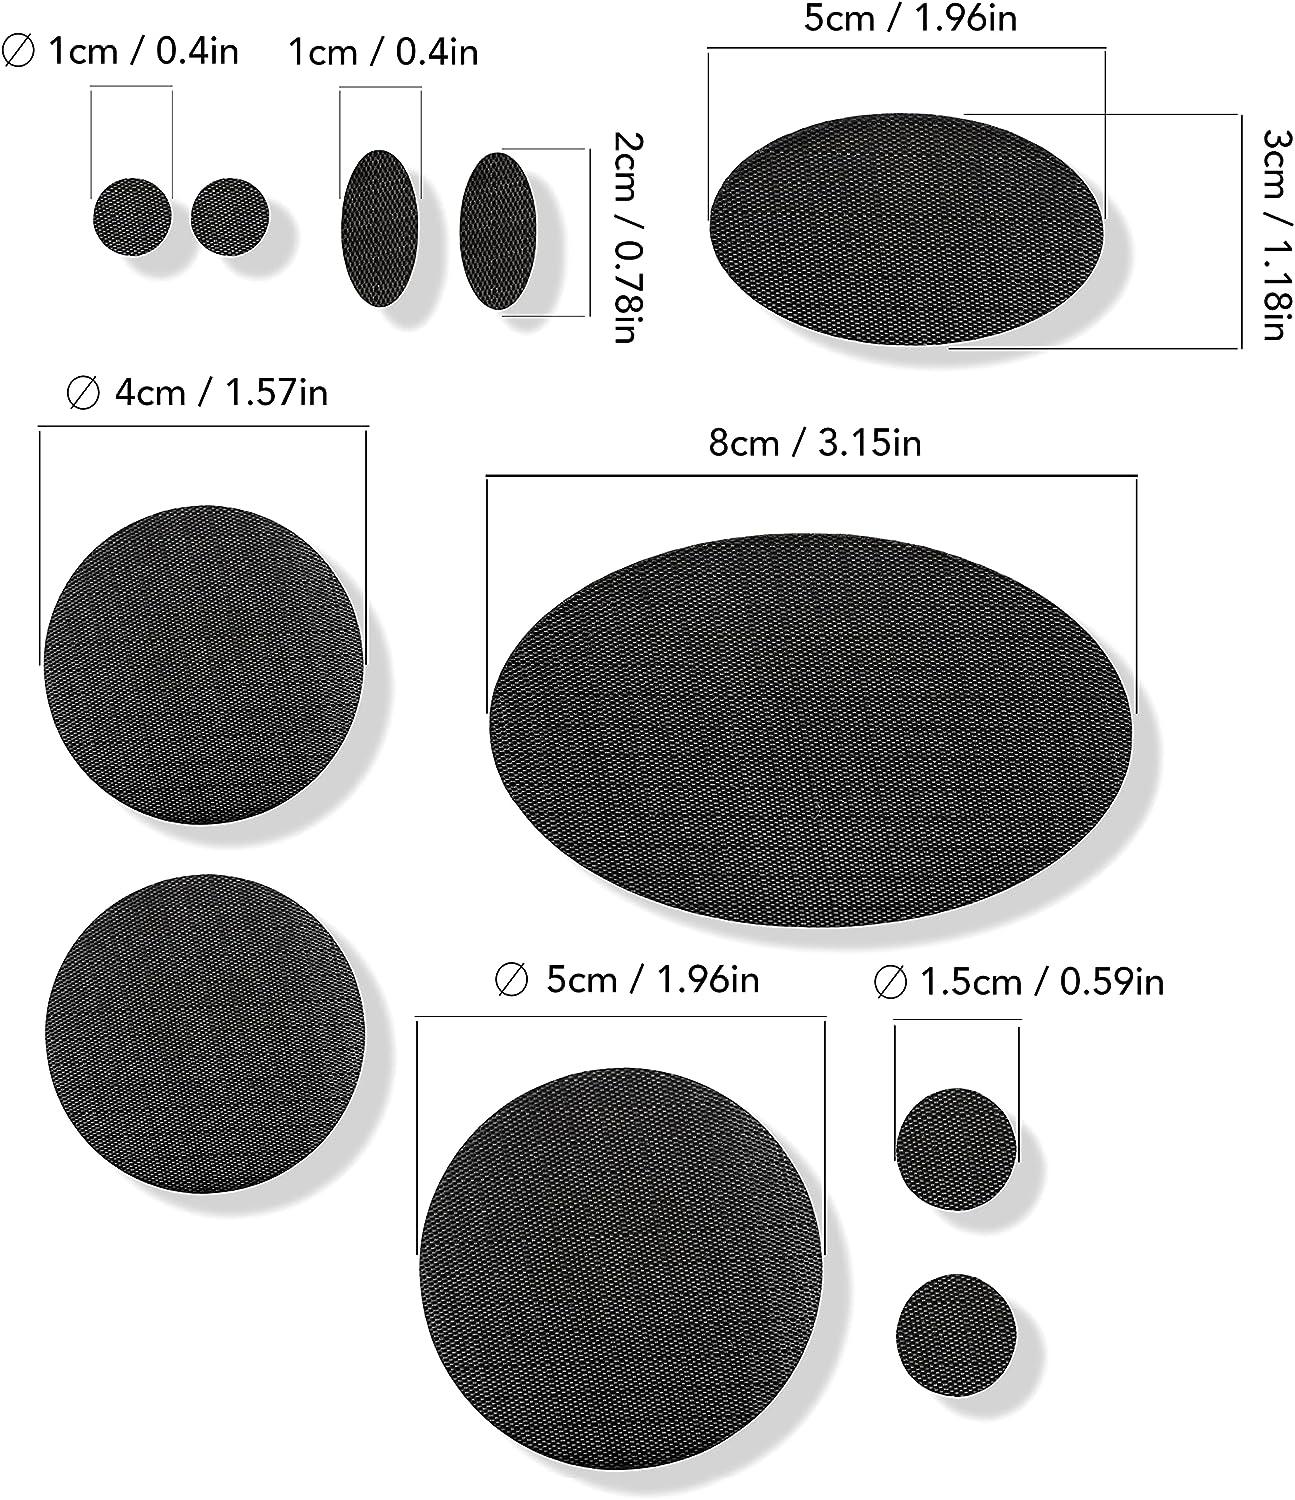 Down Jacket Repair - Self-Adhesive Repair Patches for Down Jackets & Sleeping Bags - 25 Colours